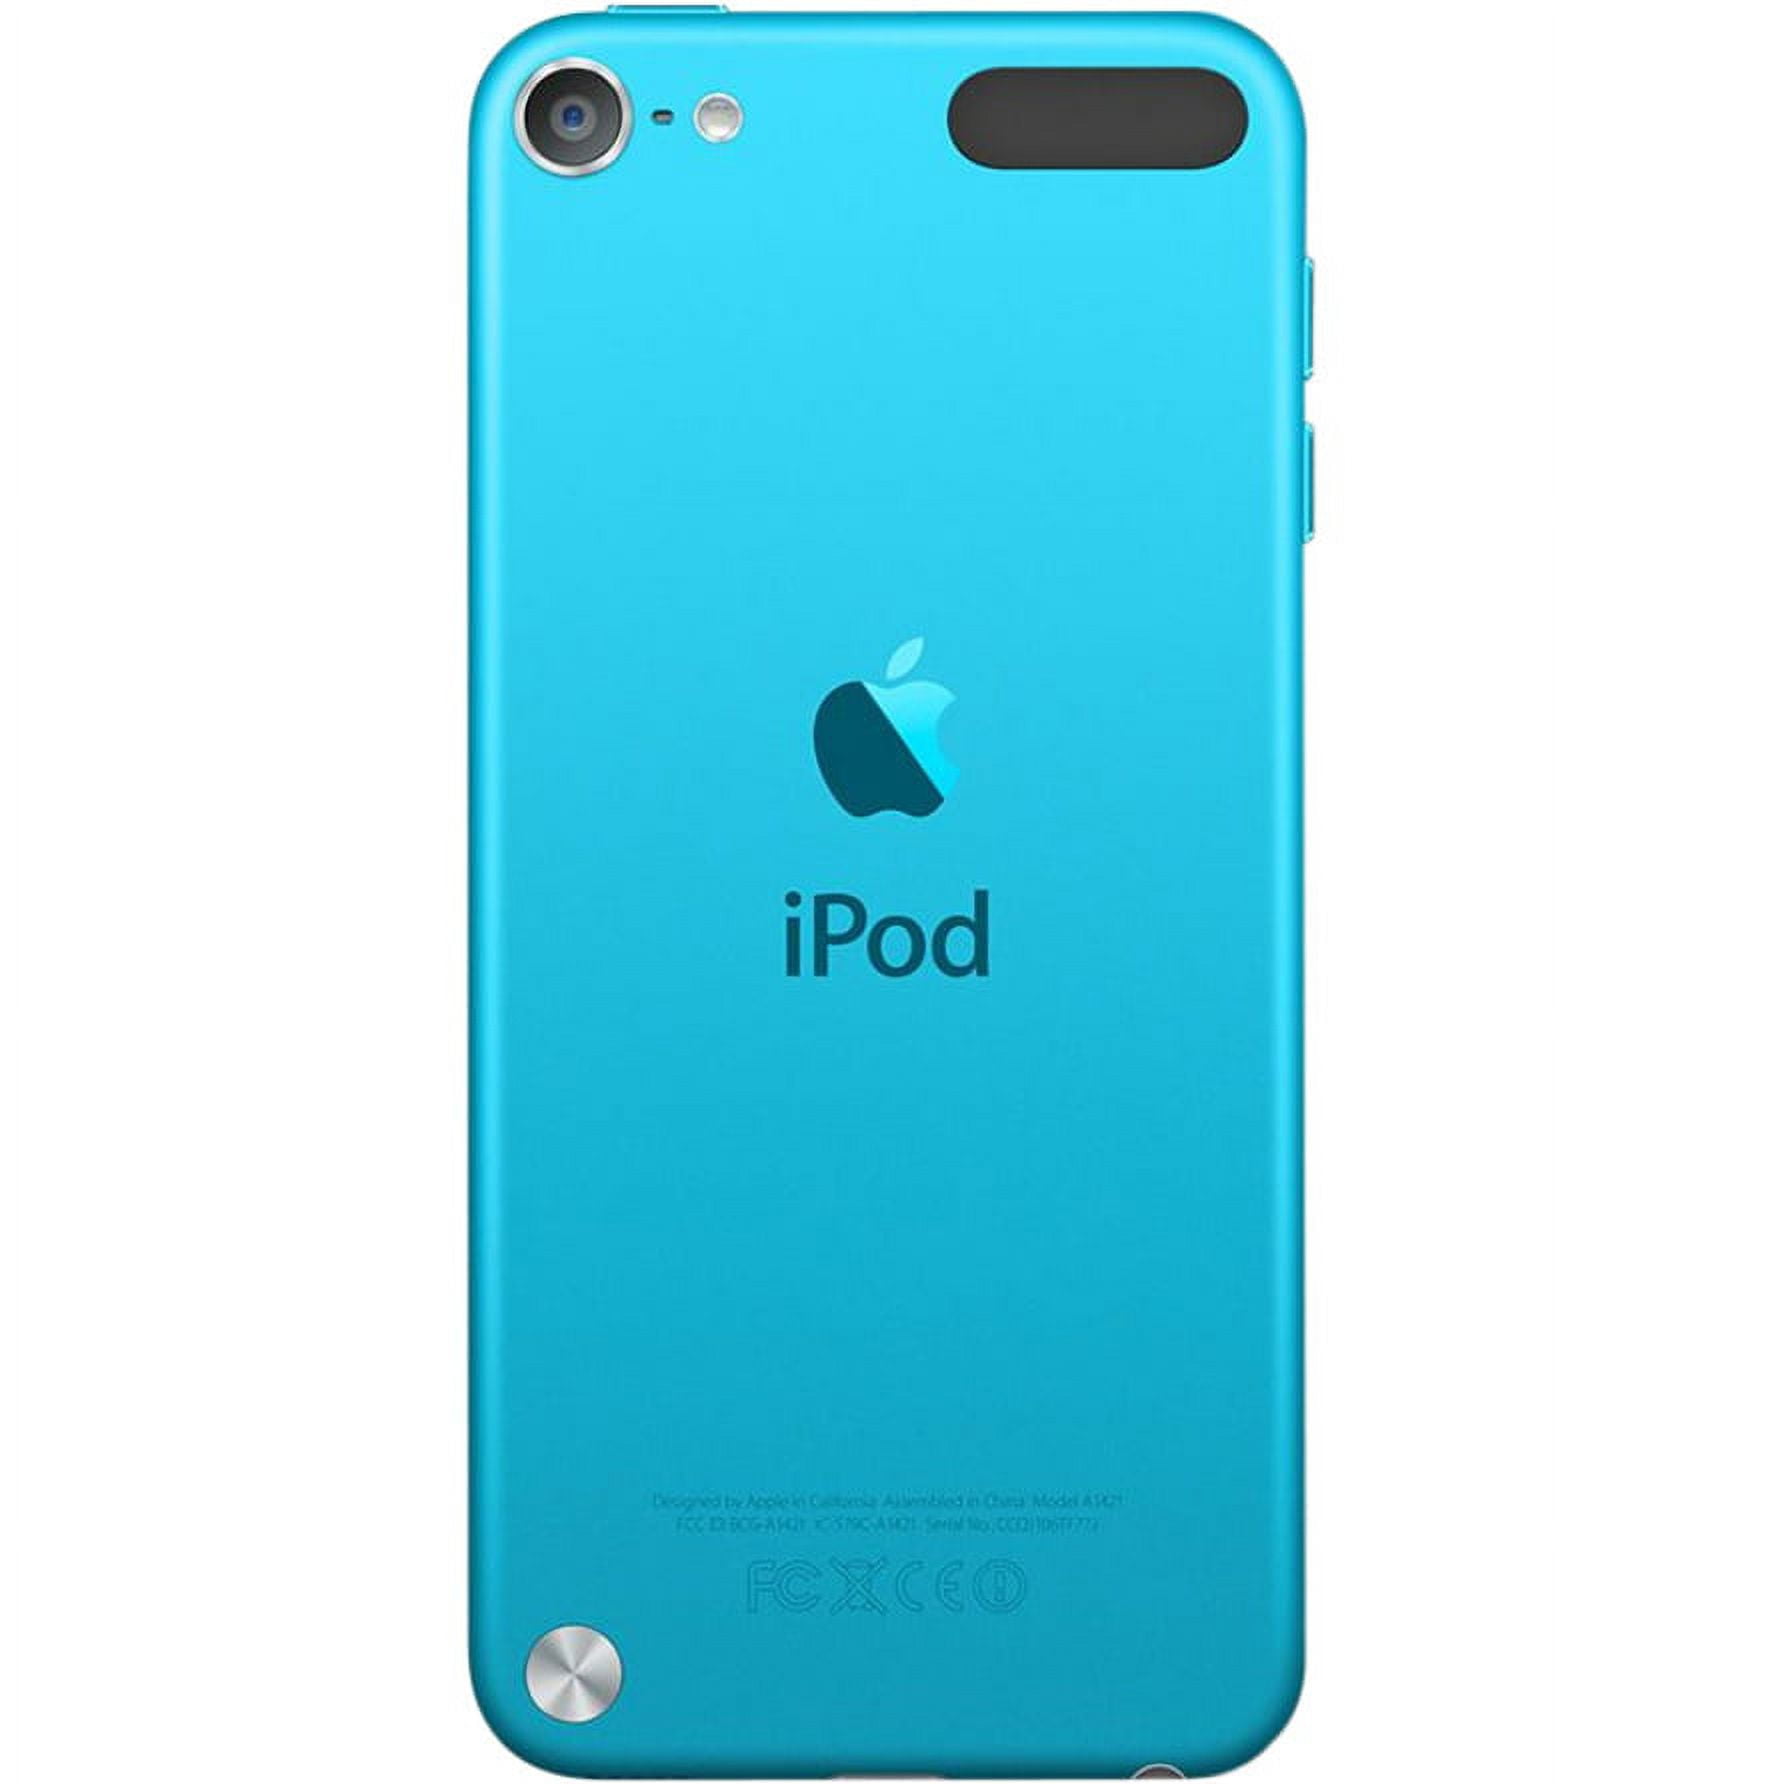 Apple iPod touch 5G 64GB MP3/Video Player with LCD Display